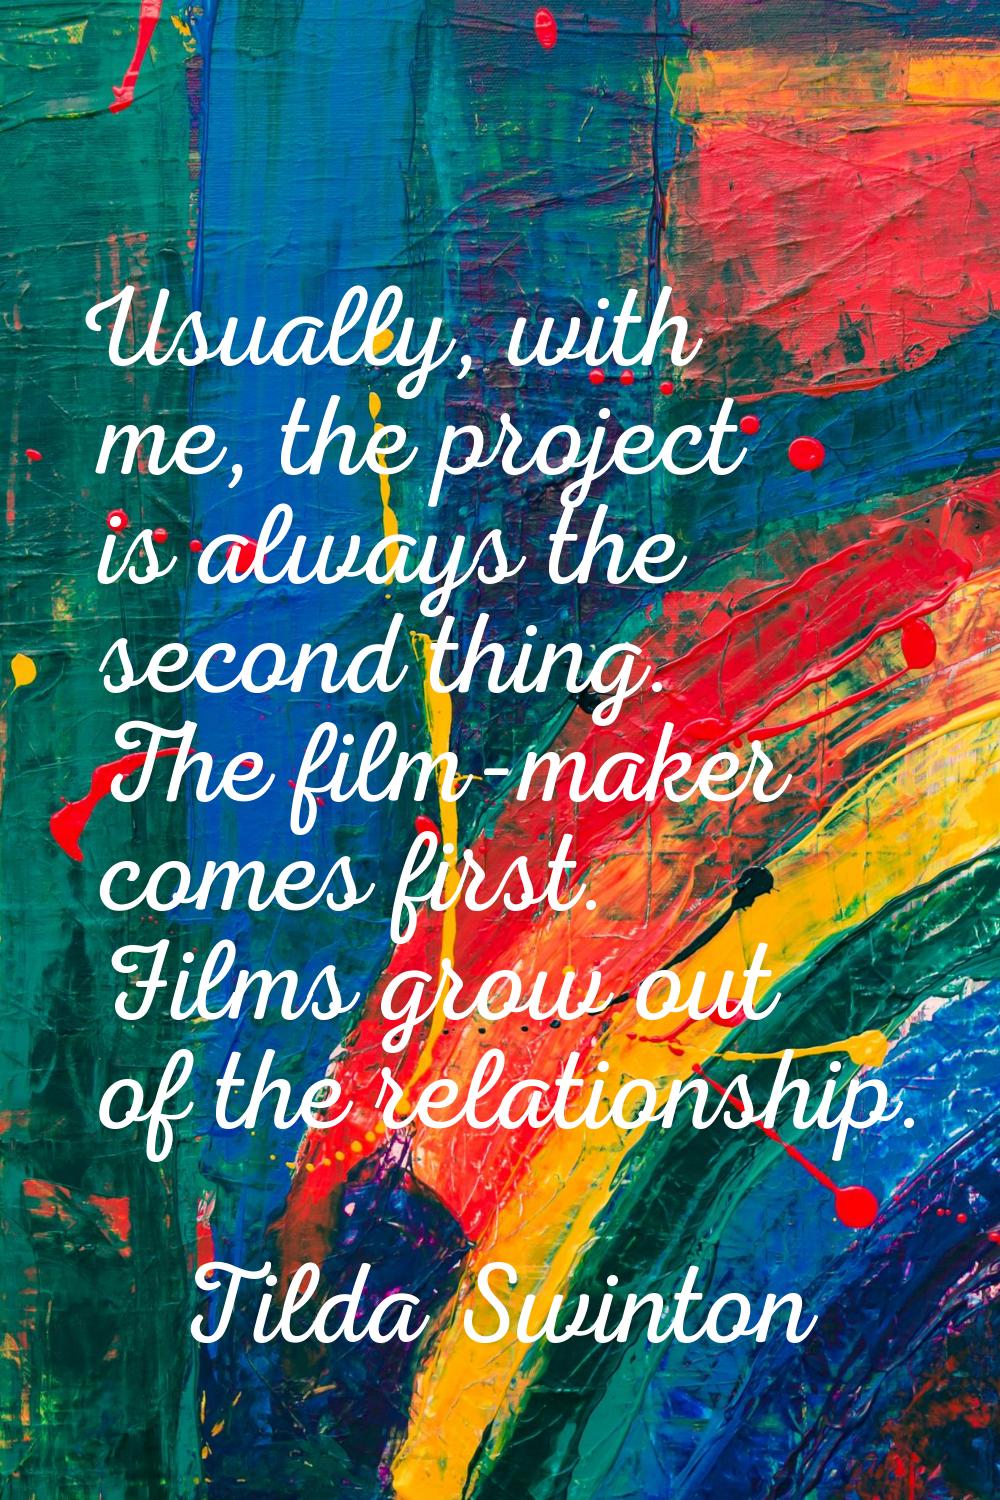 Usually, with me, the project is always the second thing. The film-maker comes first. Films grow ou